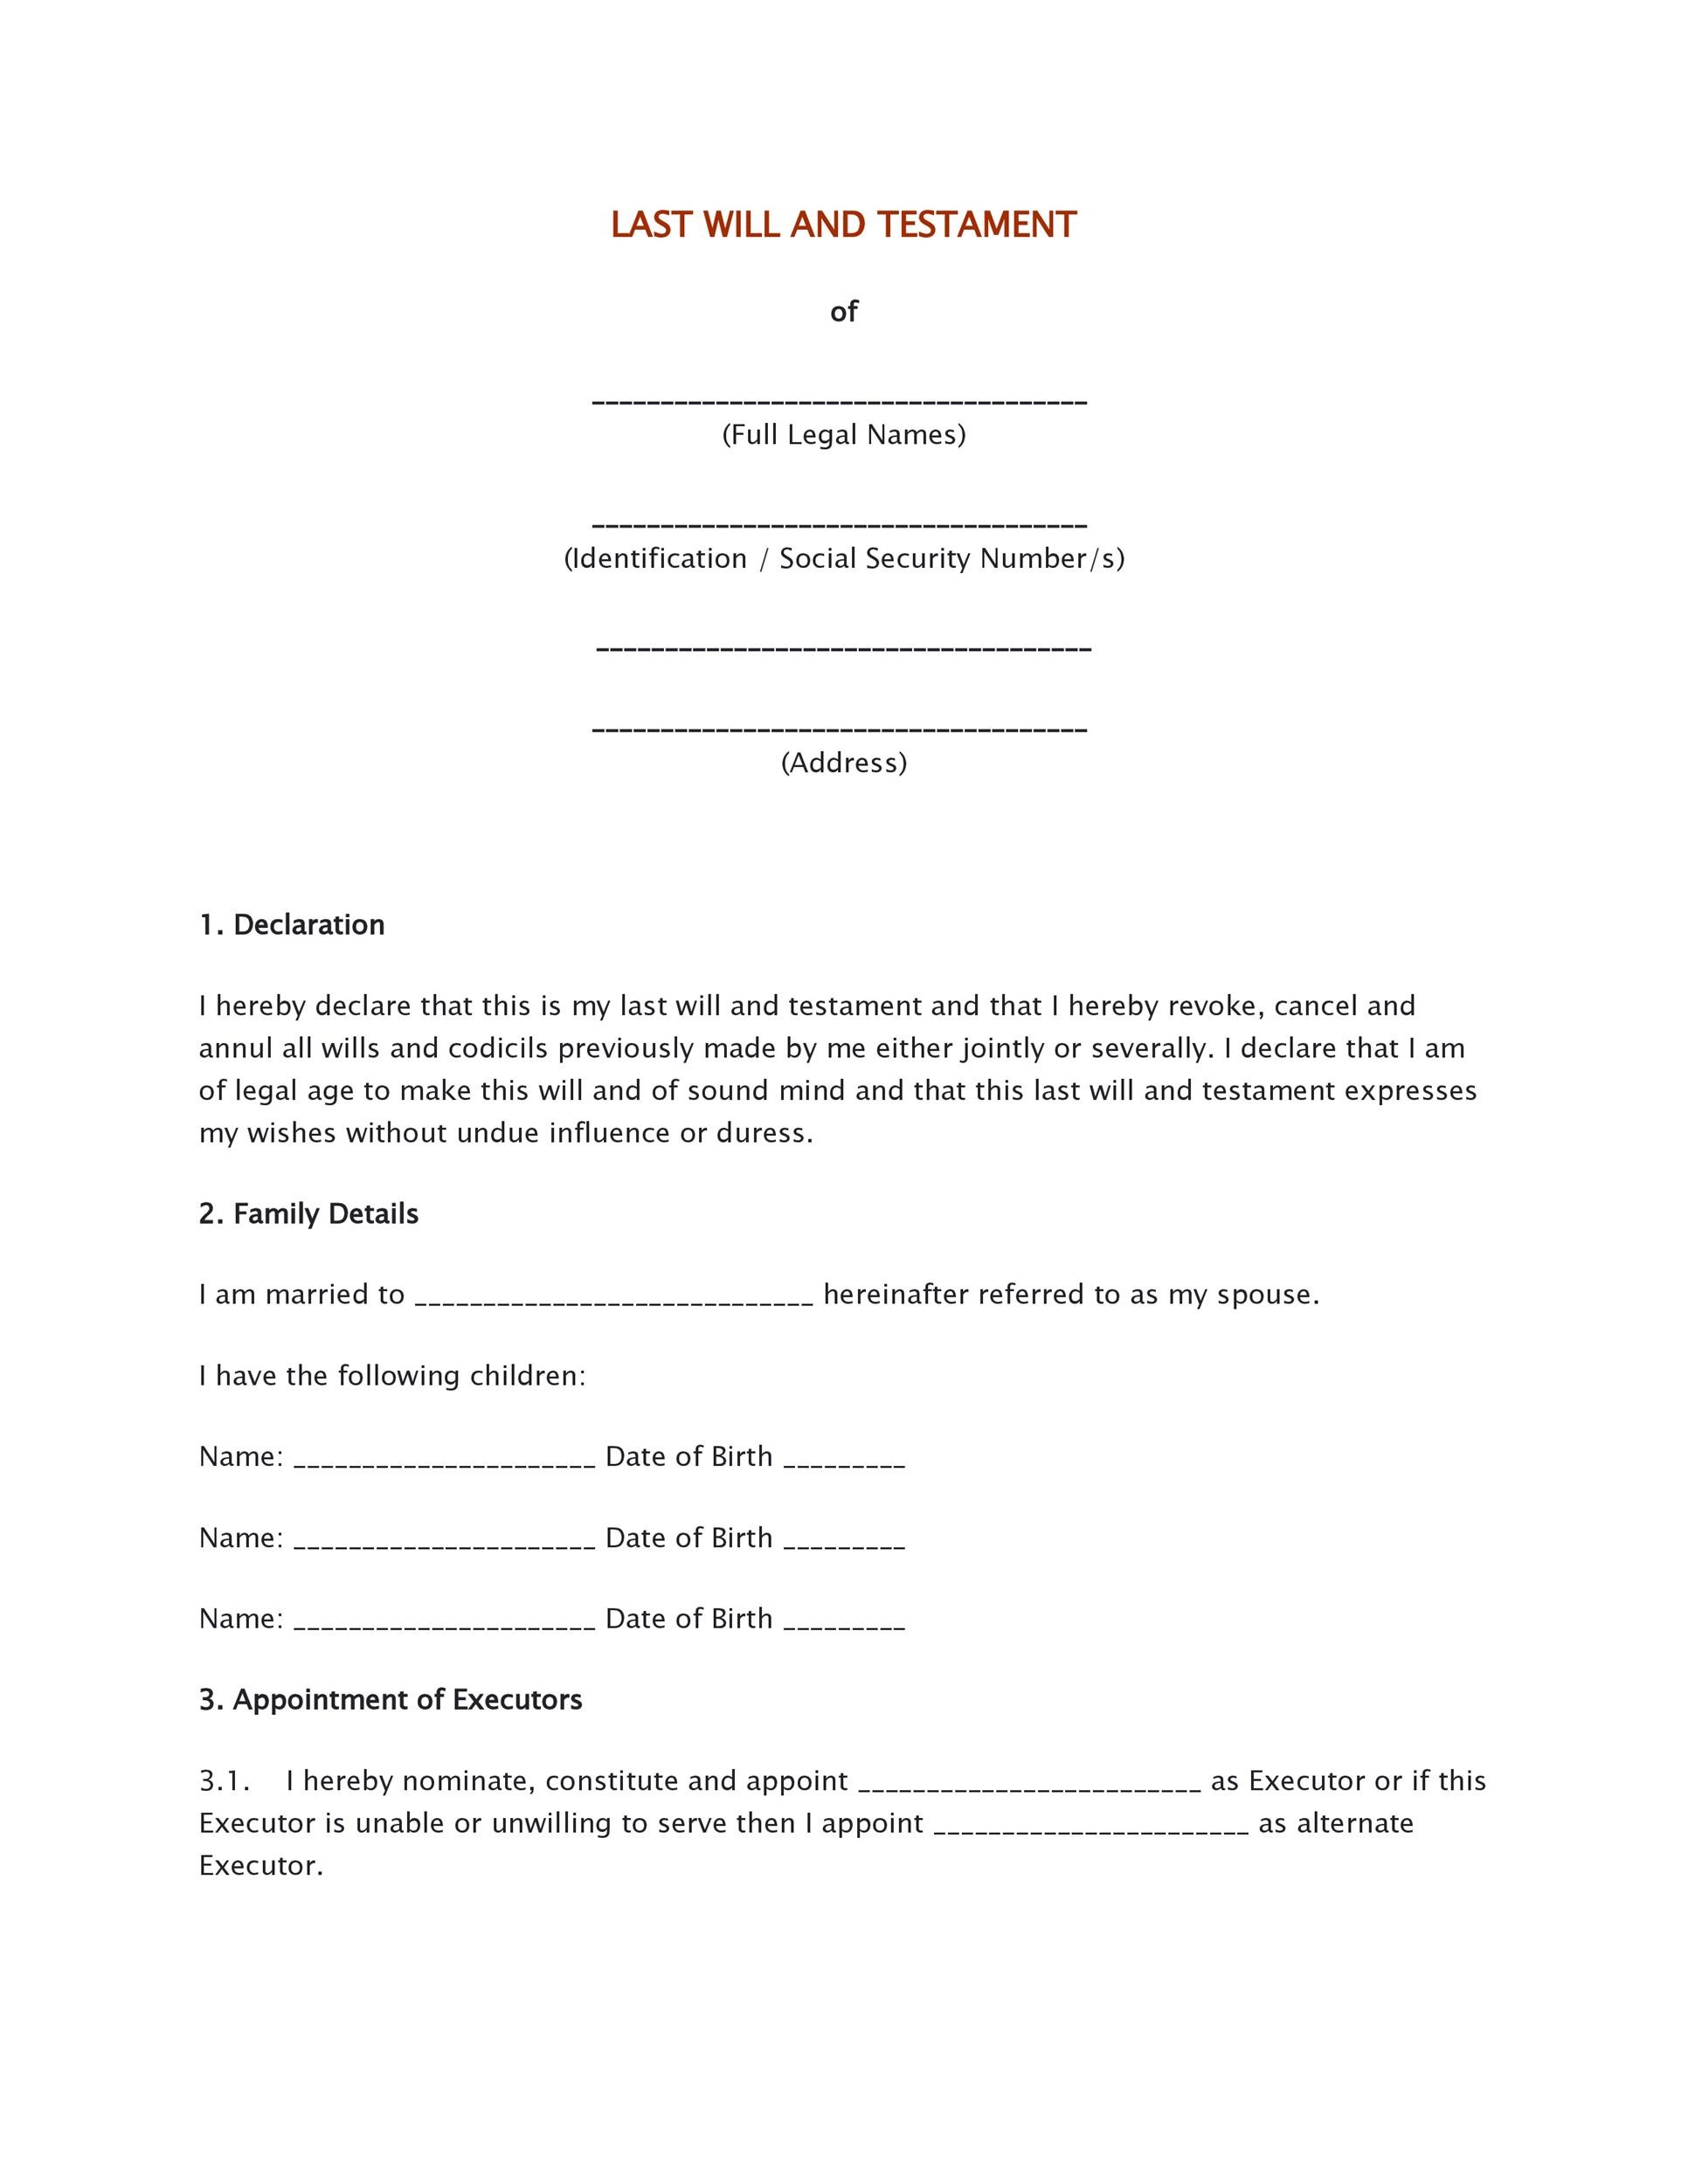 last-will-and-testament-forms-free-printable-32-last-will-templates